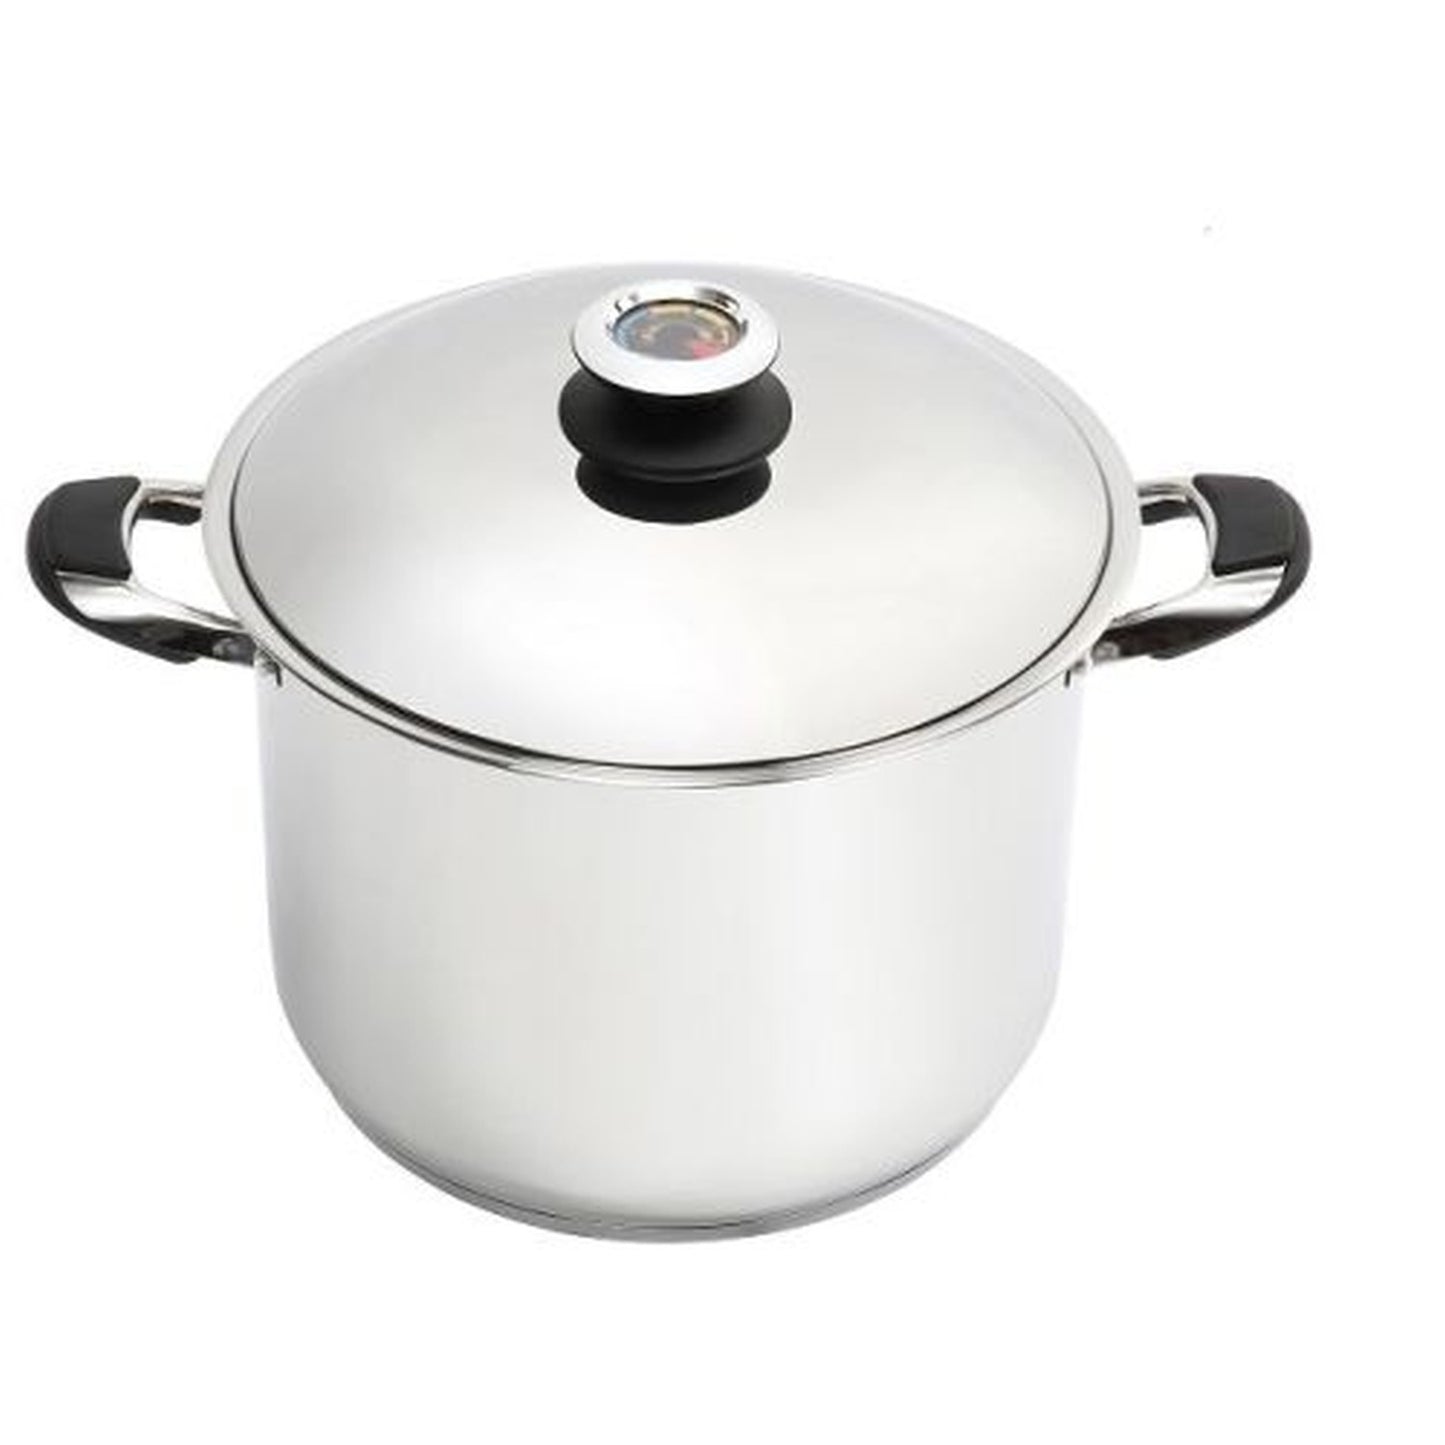 Lorenzo Stainless Steel 24 Qt Stock Pot Design By Valenti, Stainless Steel